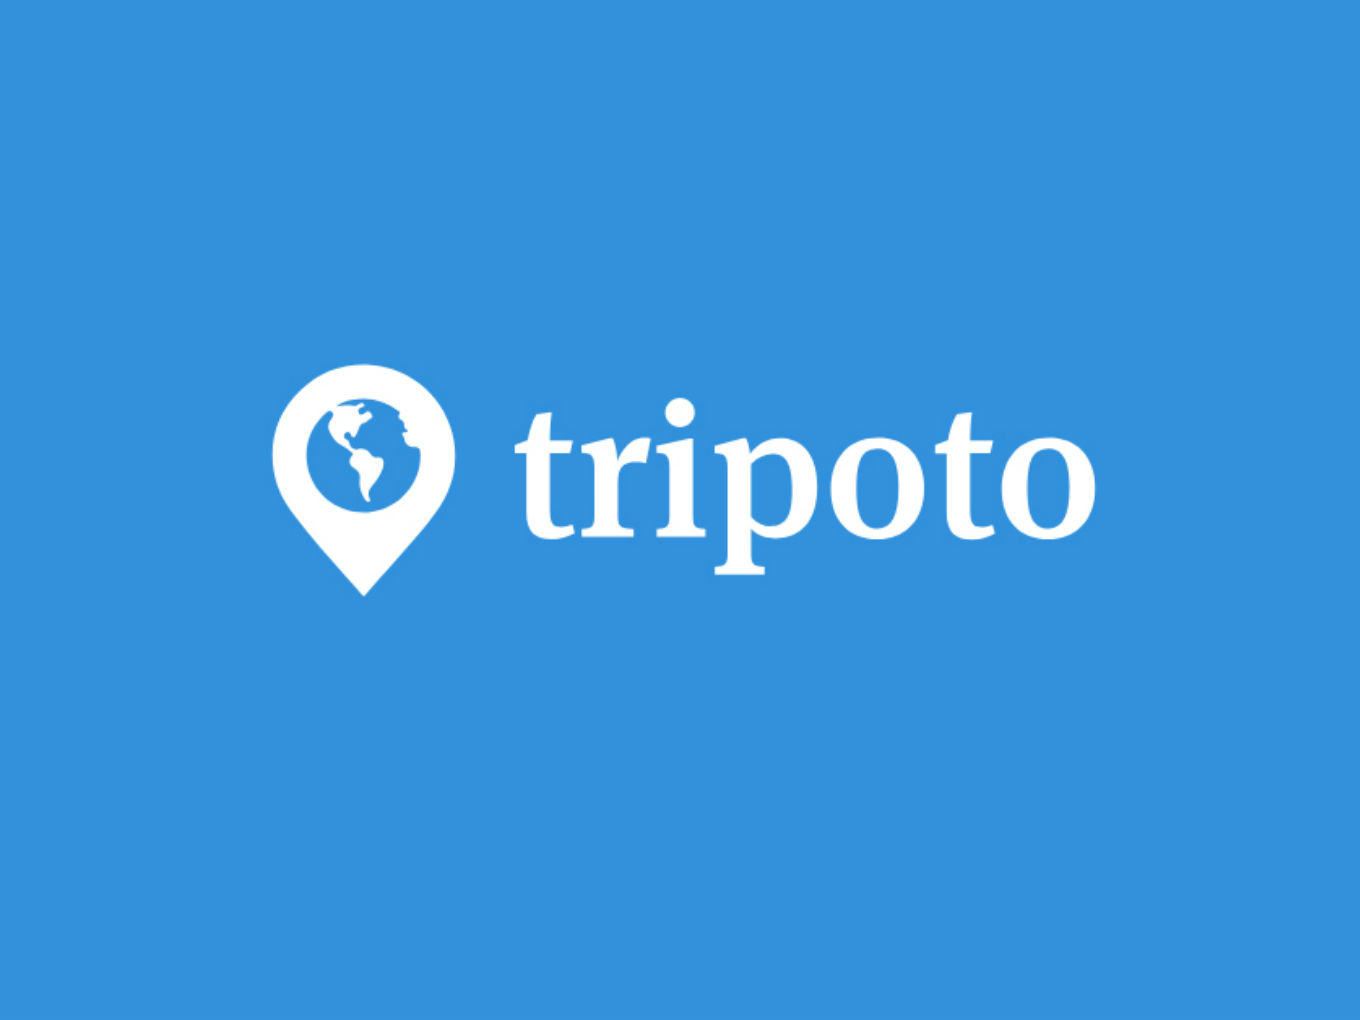 With $3.6 Mn Fresh Funding, Tripoto Wants To Make Further Inroads Into India